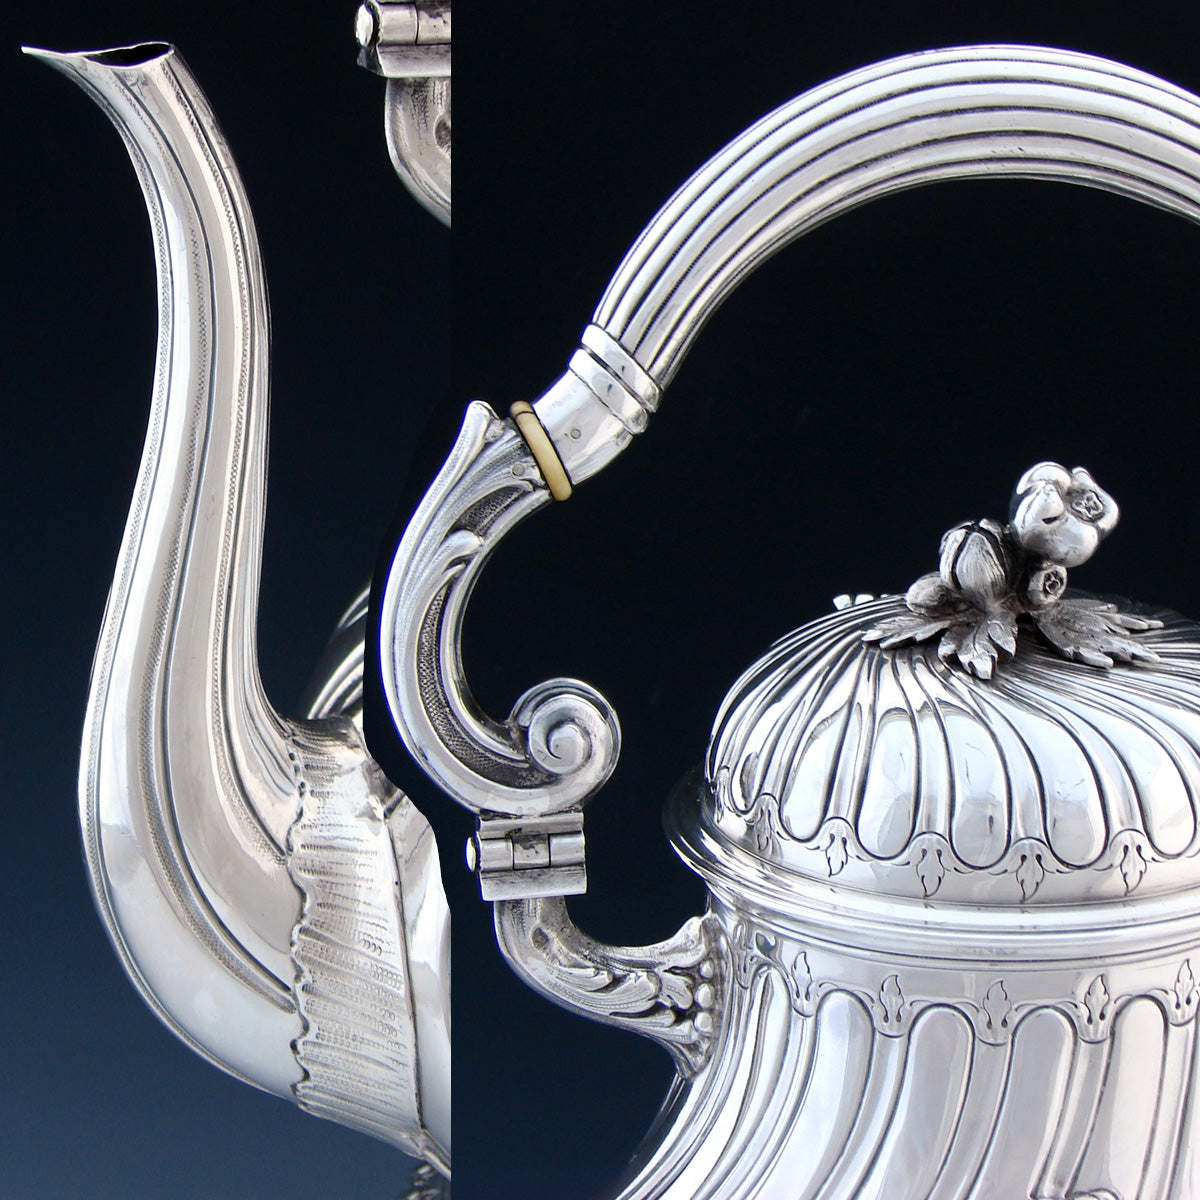 Rare Antique French Sterling Silver 15.5" Tea or Coffee Kettle, Samovar, Spiraled Body with Crown Top Heraldry